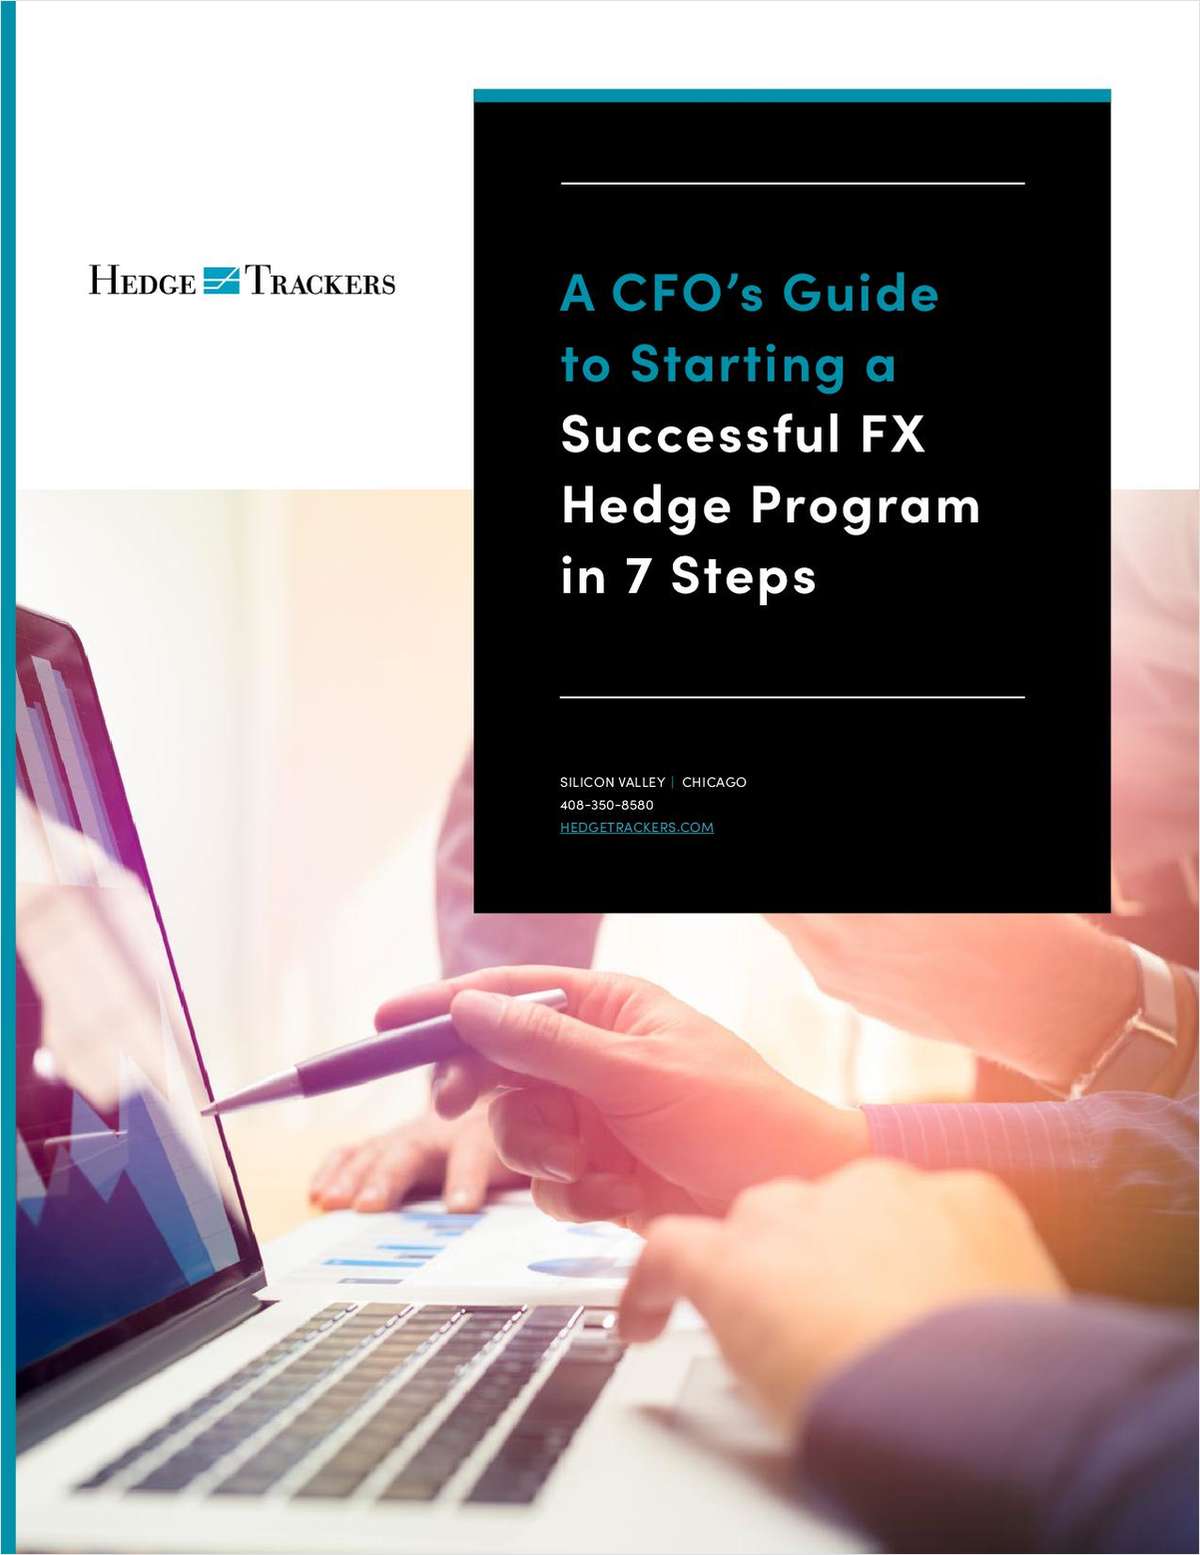 A CFO's Guide to Starting a Successful FX Hedge Program in 7 Steps